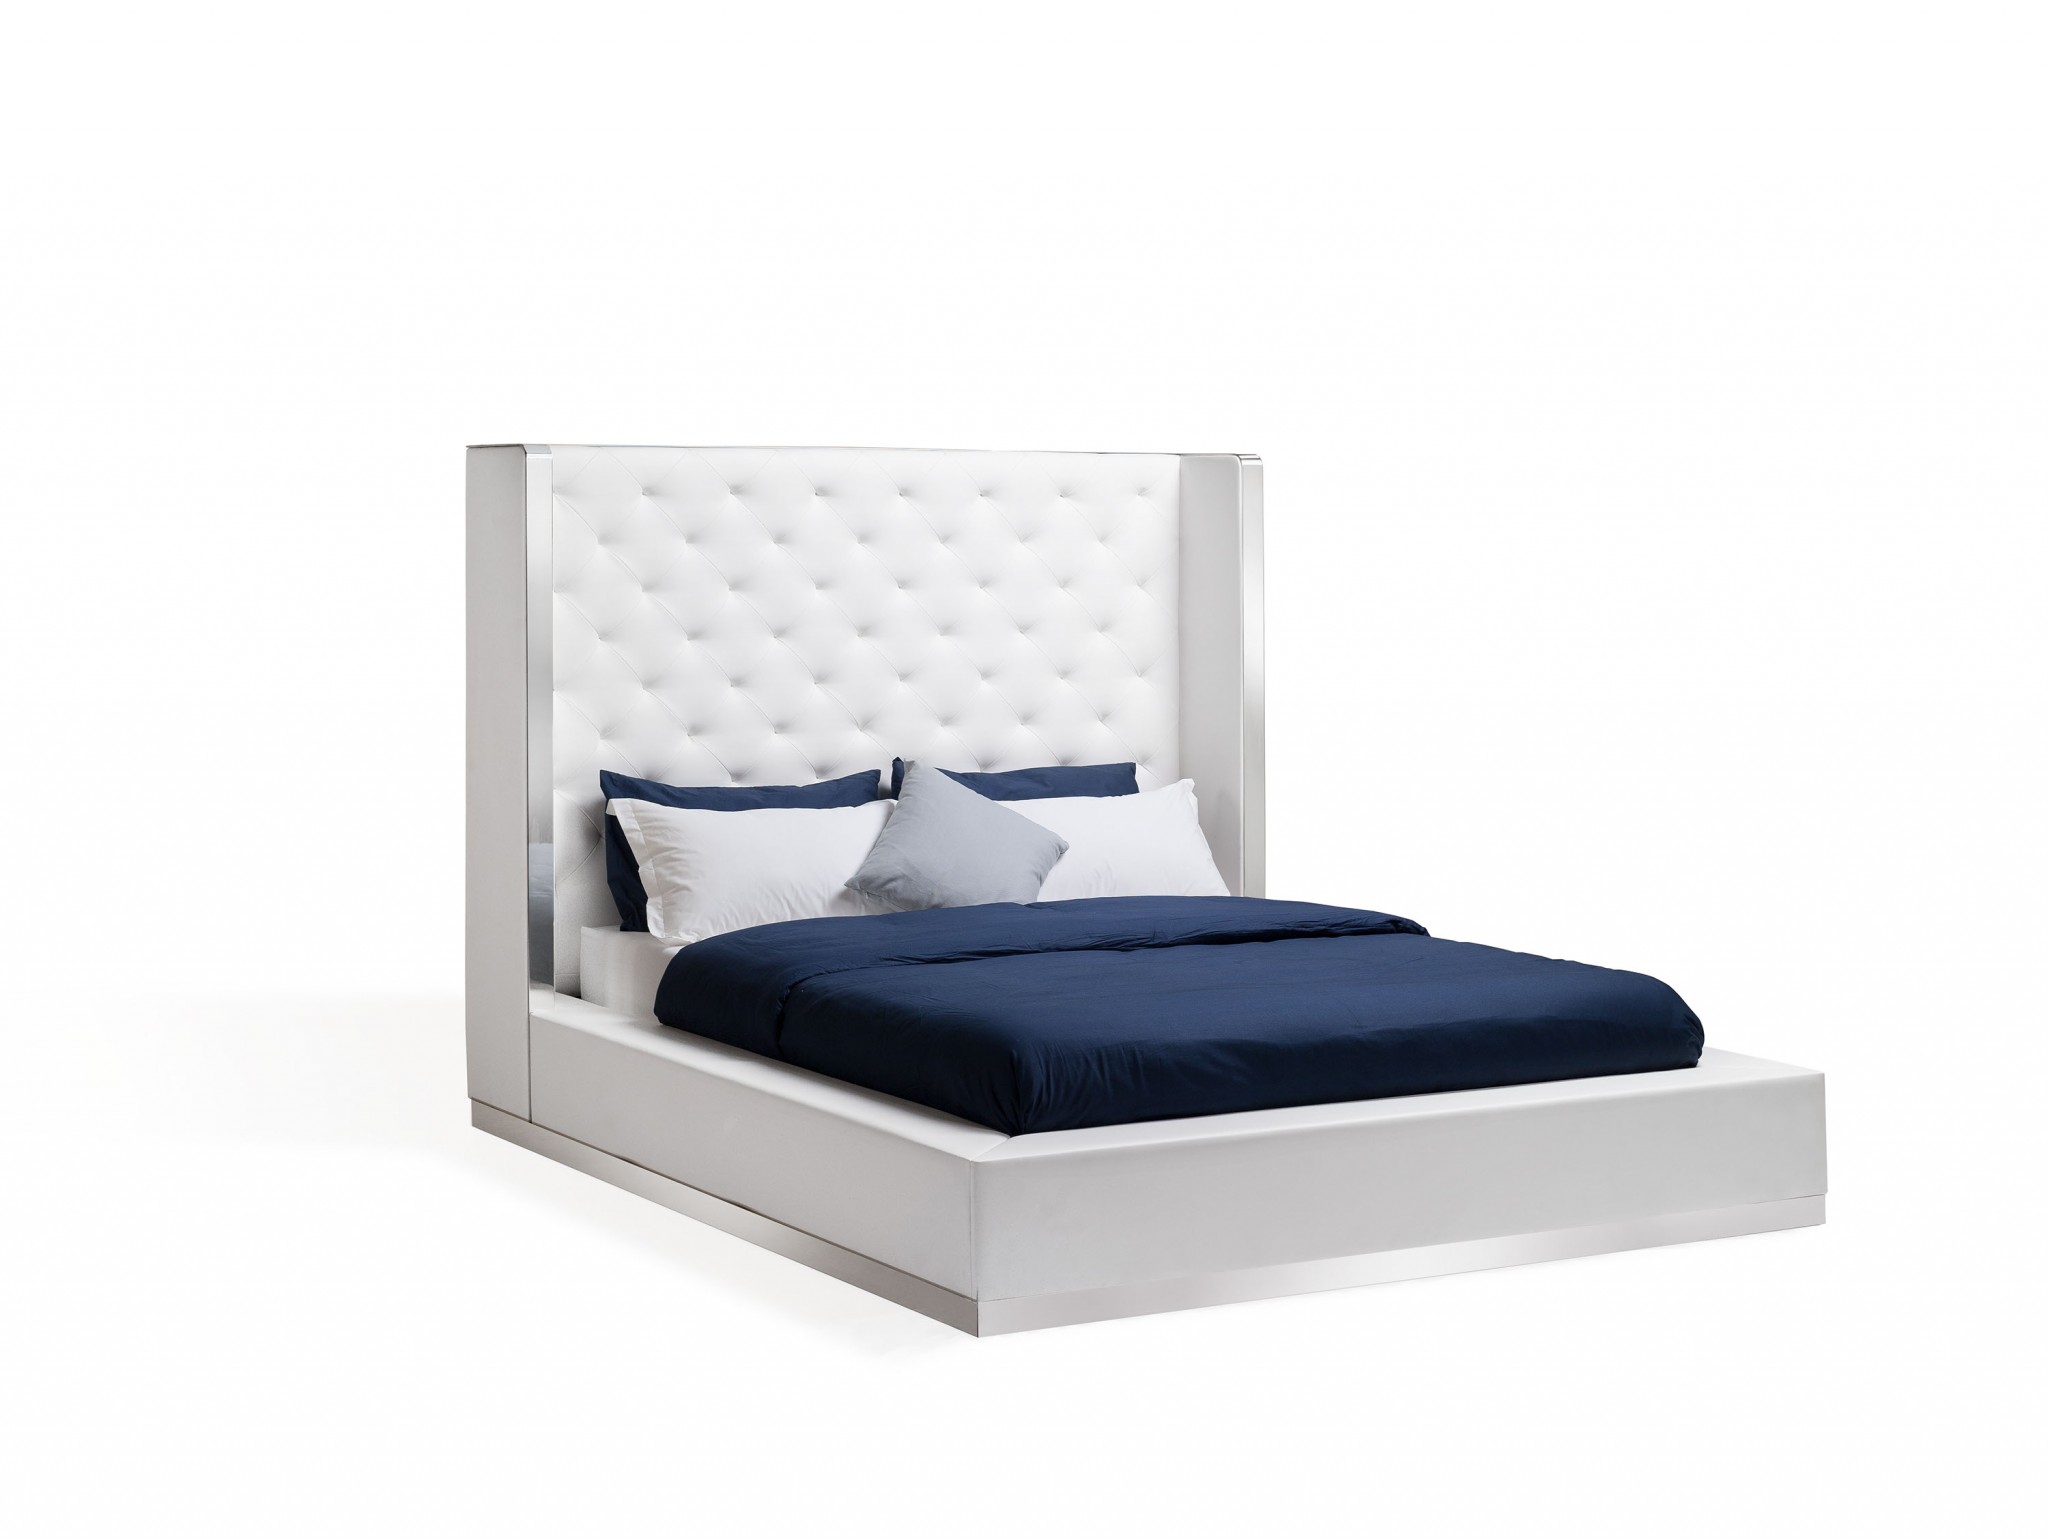 75" X 91" X 60" White Stainless Steel Queen Bed